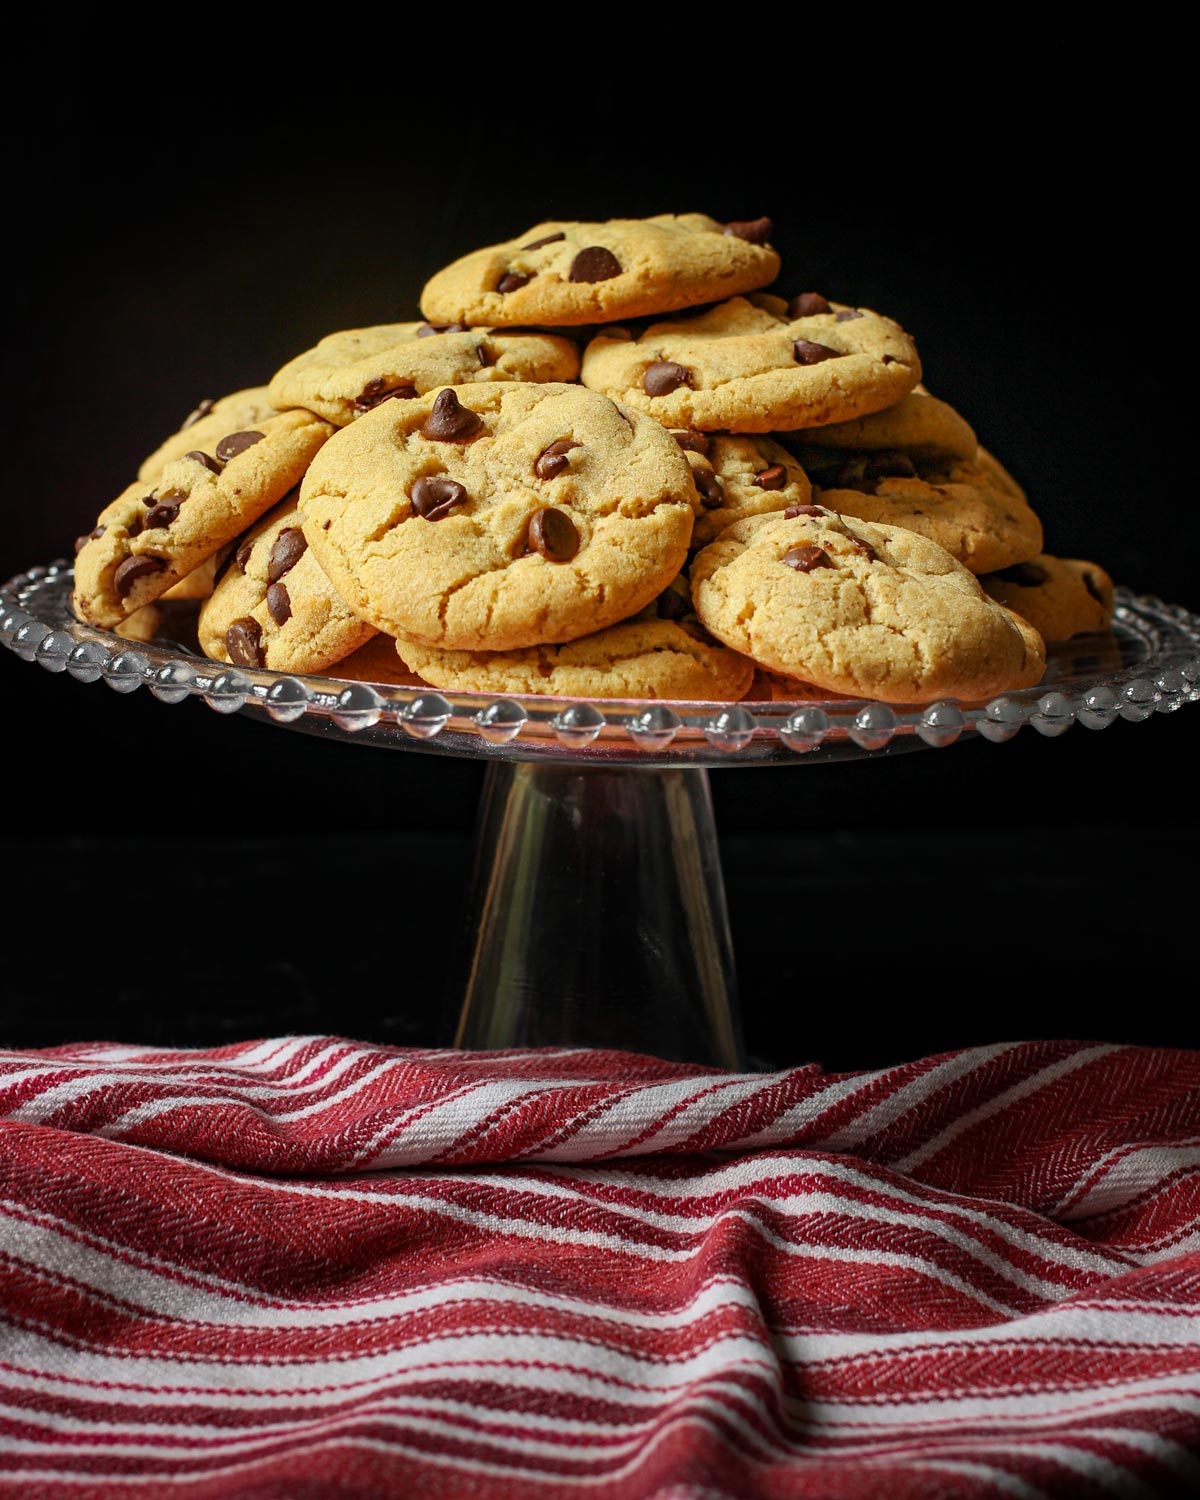 pile of chocolate chip cookies on cake platter with red striped cloth nearby.